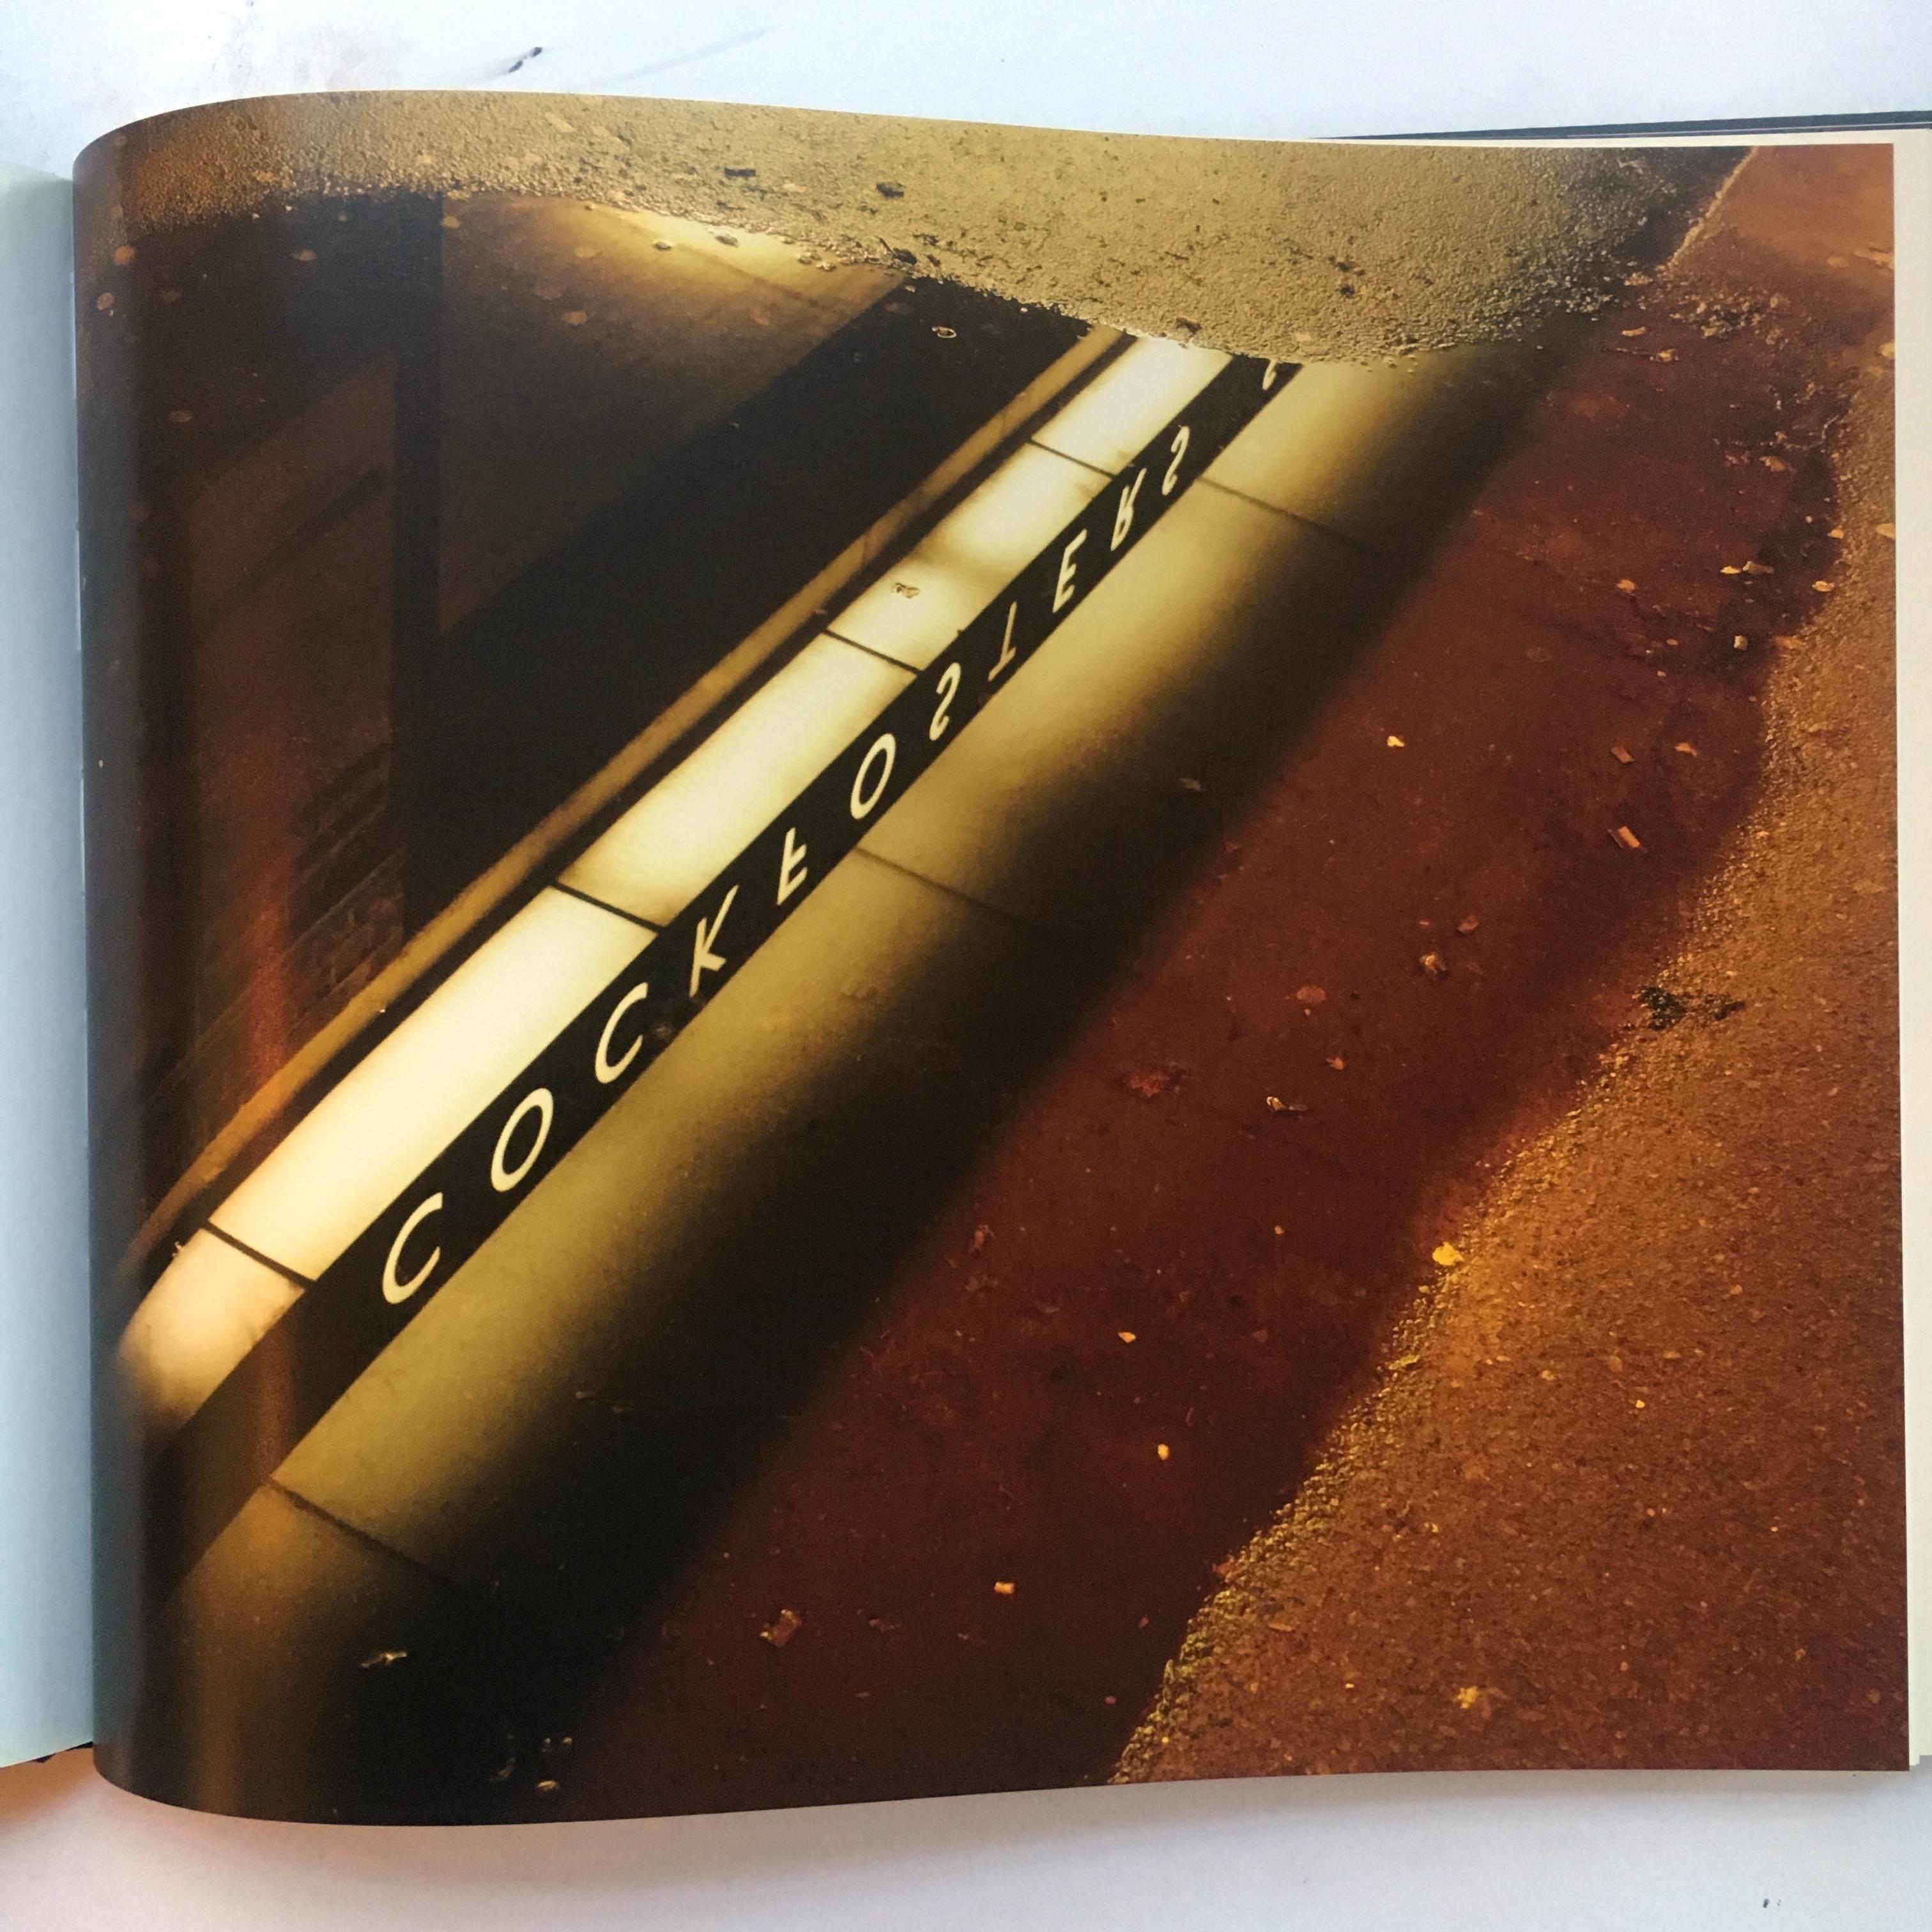 First edition, hard cover, published by Black Dog Publishing, London, 2009

The works of German photographer Rut Blees Luxemburg are undeniably beautiful, elevating the over-looked or the obscured in the cityscape with streetlights creating rich